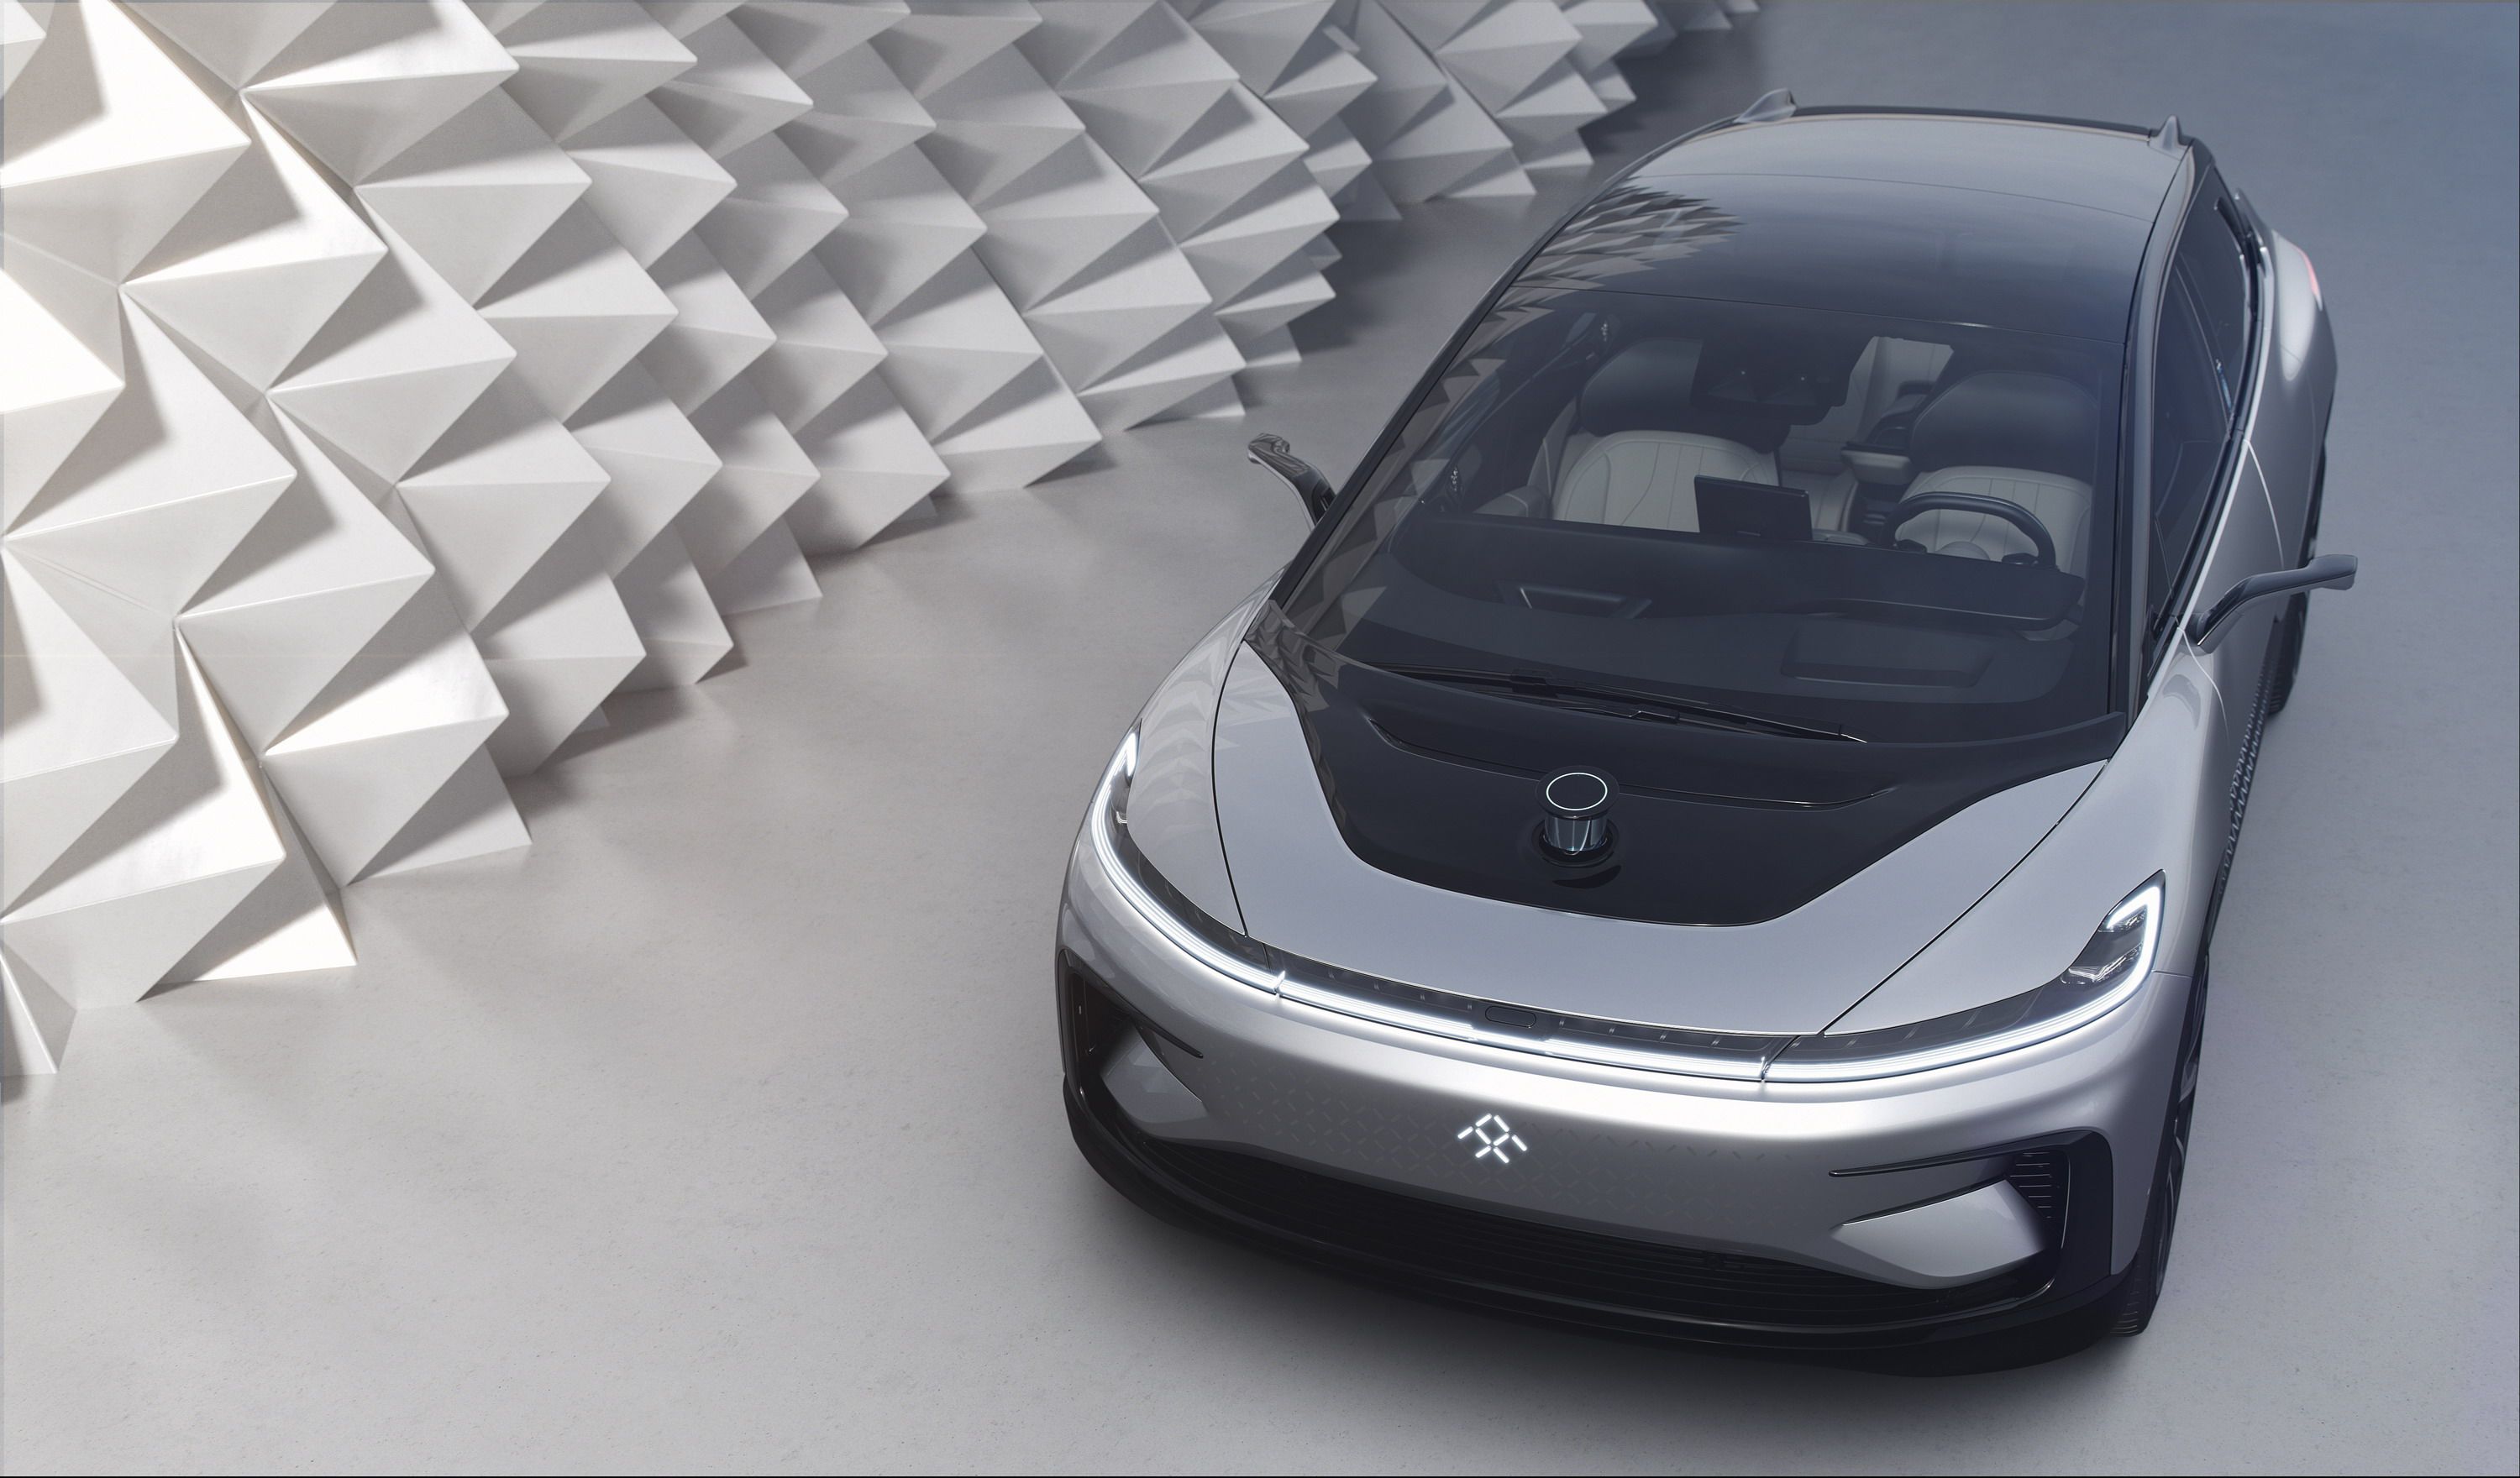 2018 Did They Steal? Faraday Future Sues Former Execs for Trade Secret Theft